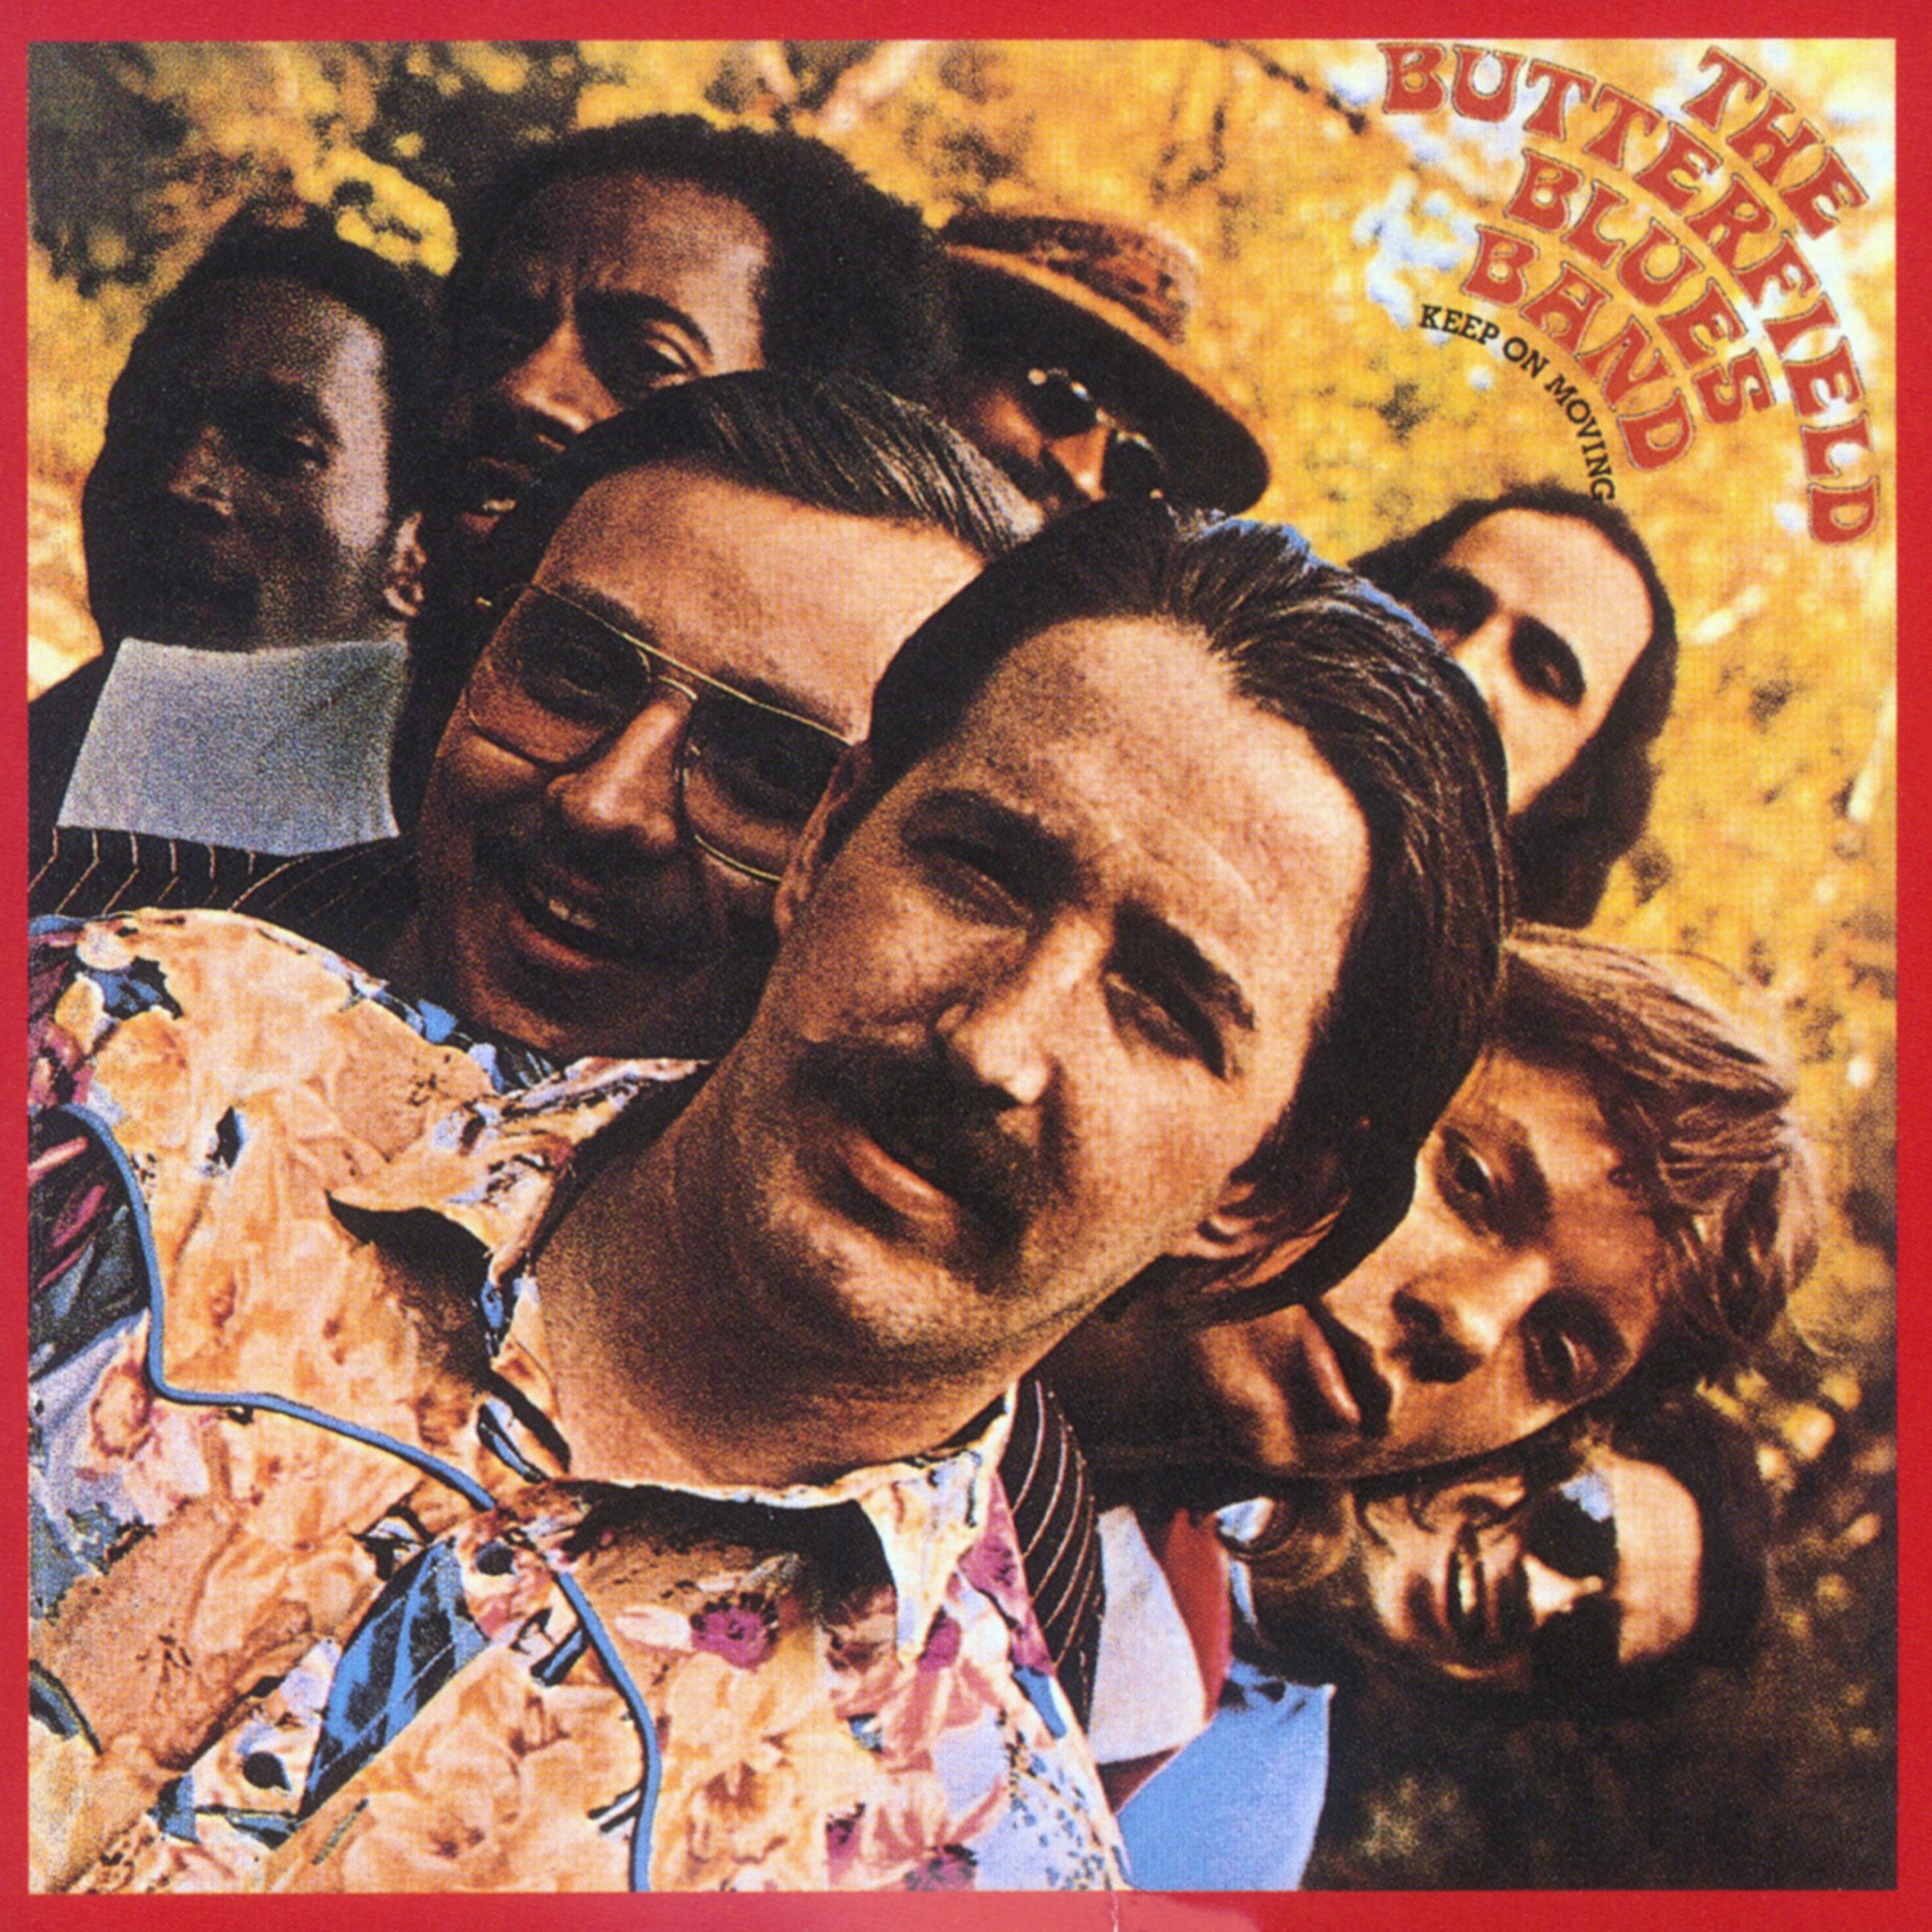 The Paul Butterfield Blues Band – Keep On Moving